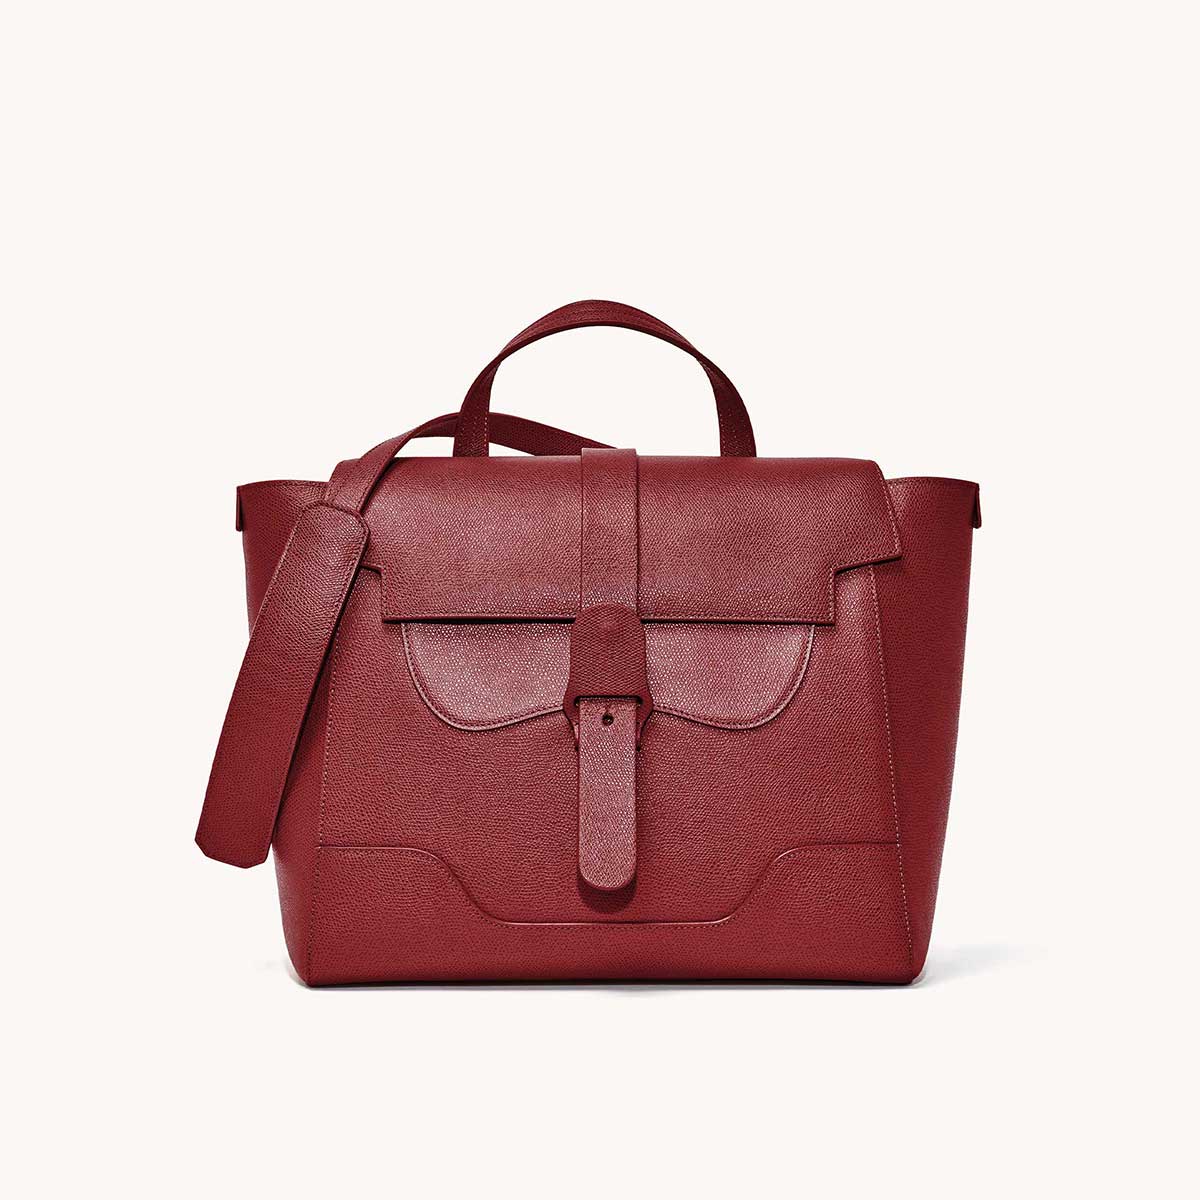 Maestra Bag Pebbled Merlot with Gold Hardware Front View with long strap draped over top